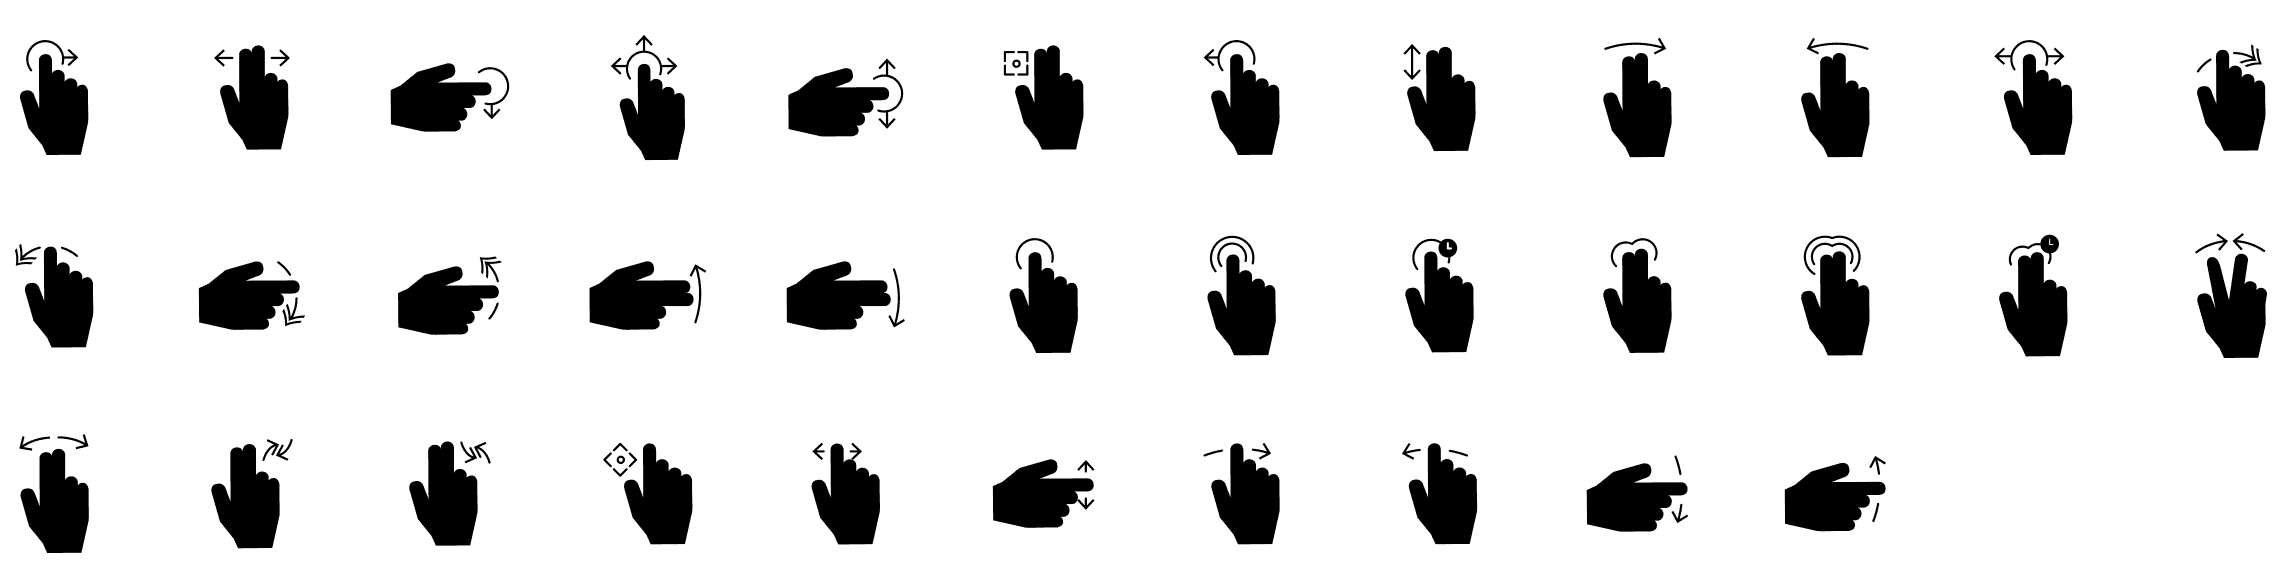 touch-gestures-glyph-icons-preview